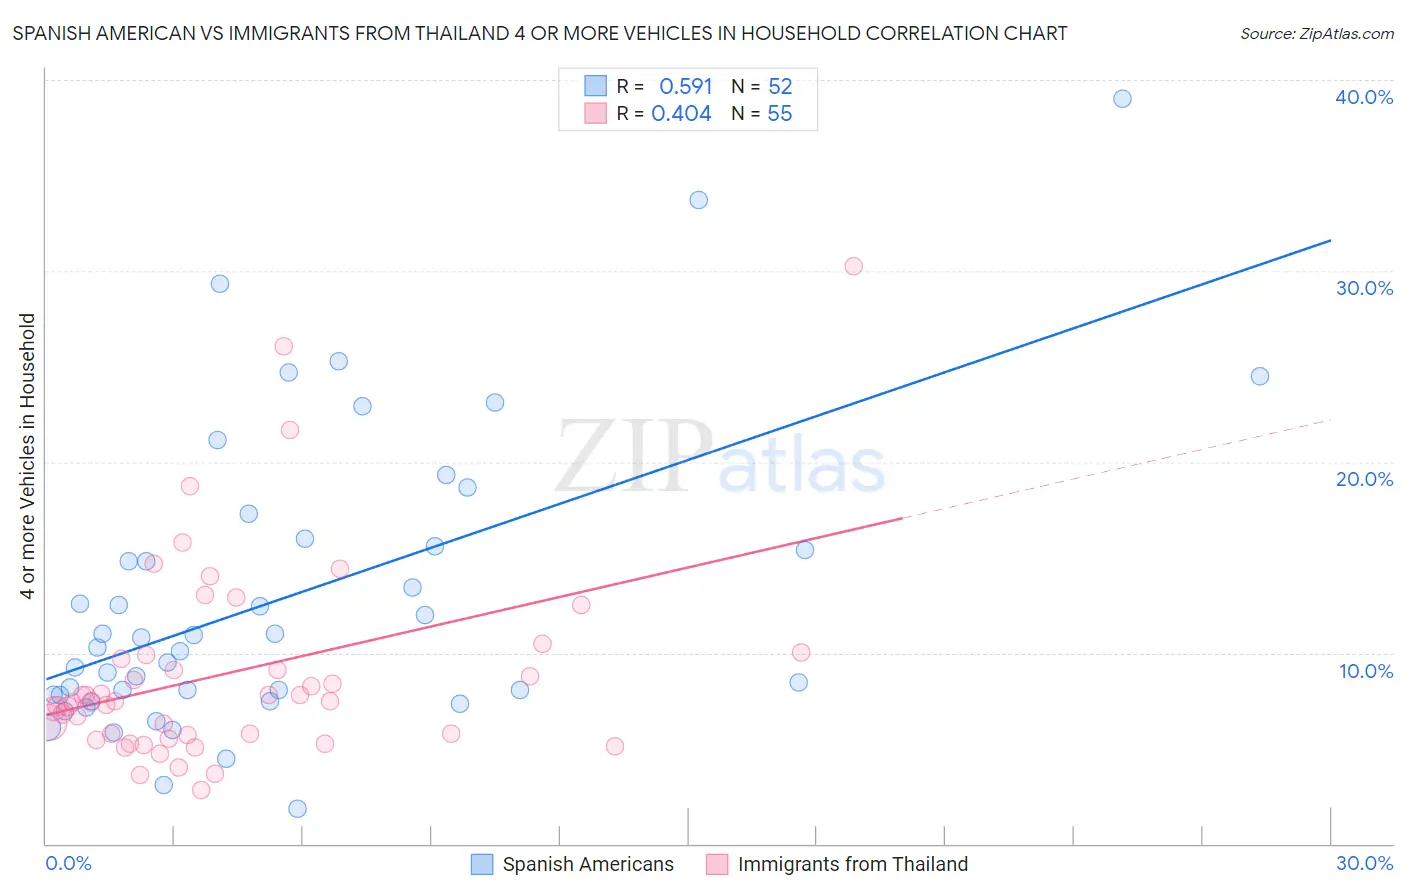 Spanish American vs Immigrants from Thailand 4 or more Vehicles in Household